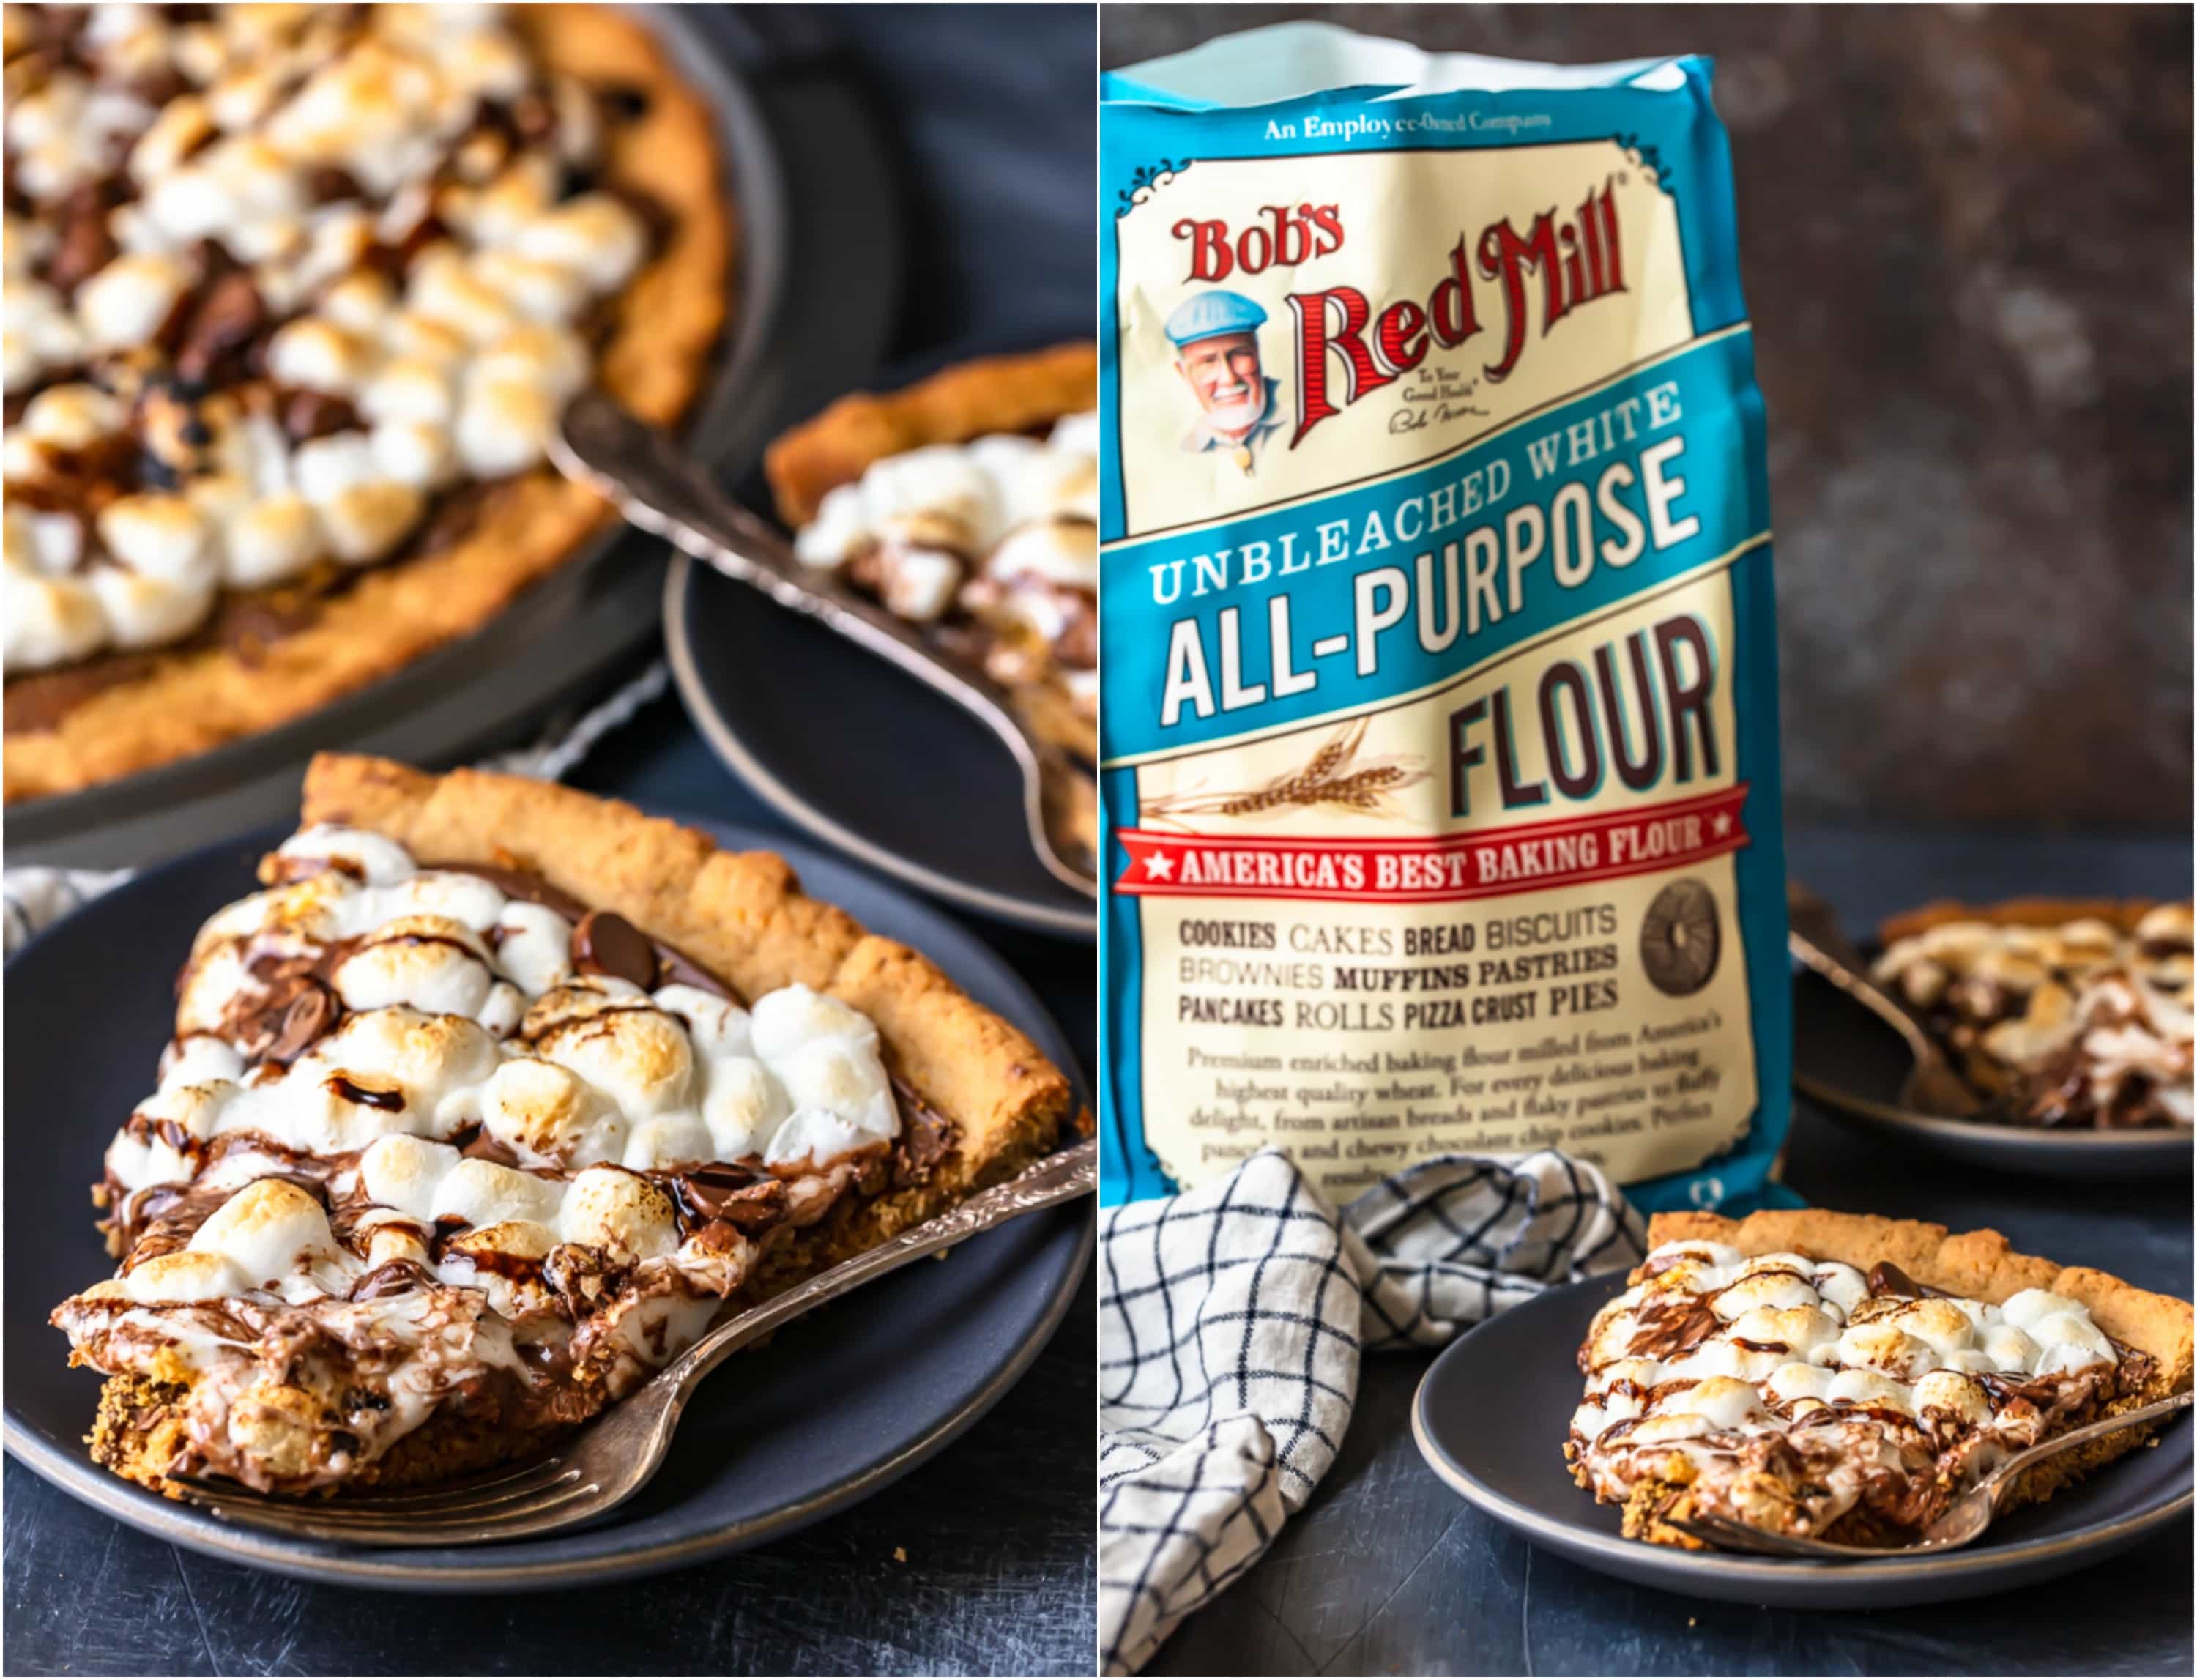 slices of smore pizza and bob's red mill flour